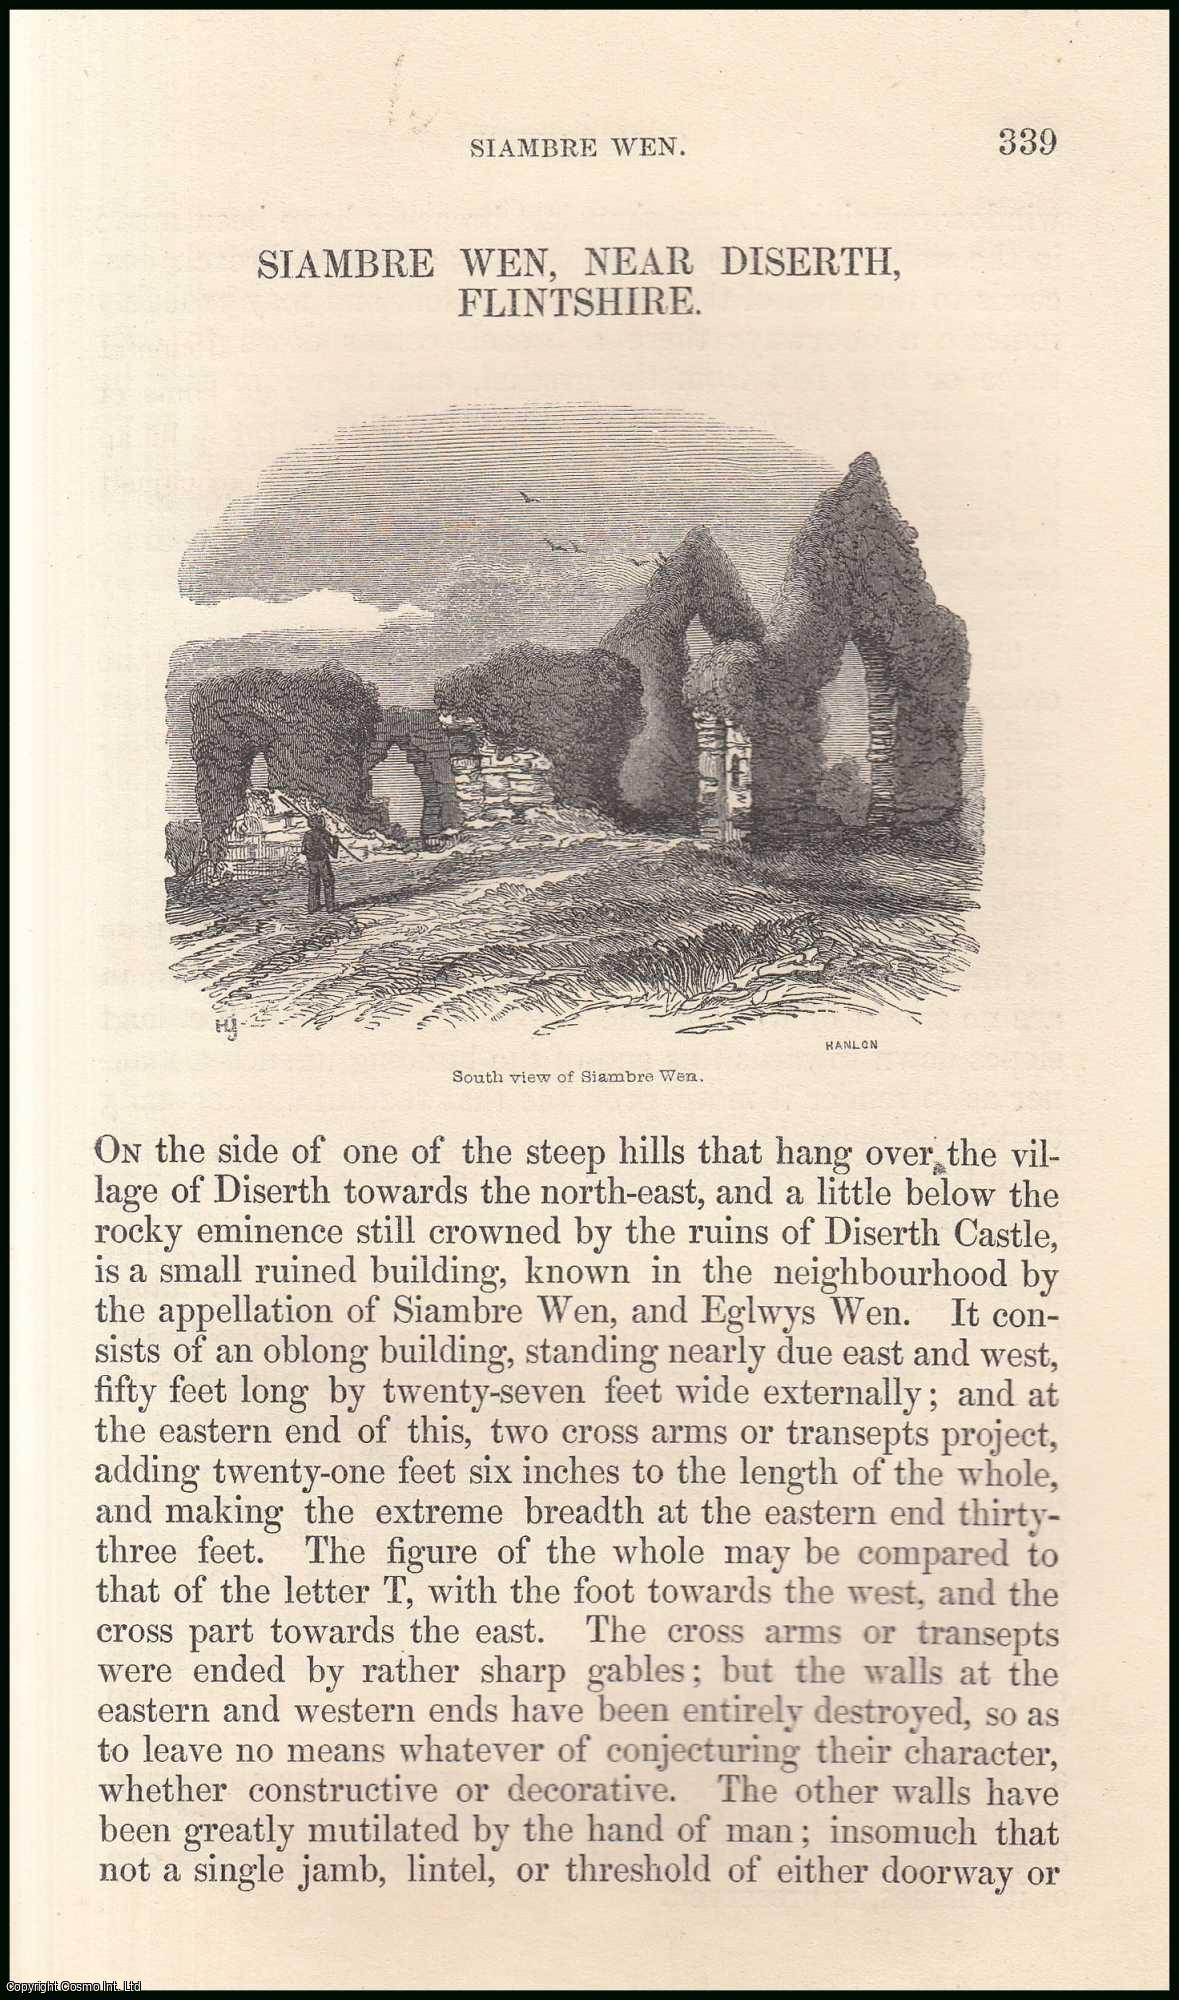 H.L.J. - Siambre Wen, Near Diserth, Flintshire. An original article from the Archaeologia Cambrensis, a Record of The Antiquities of Wales & its Marches, 1847.